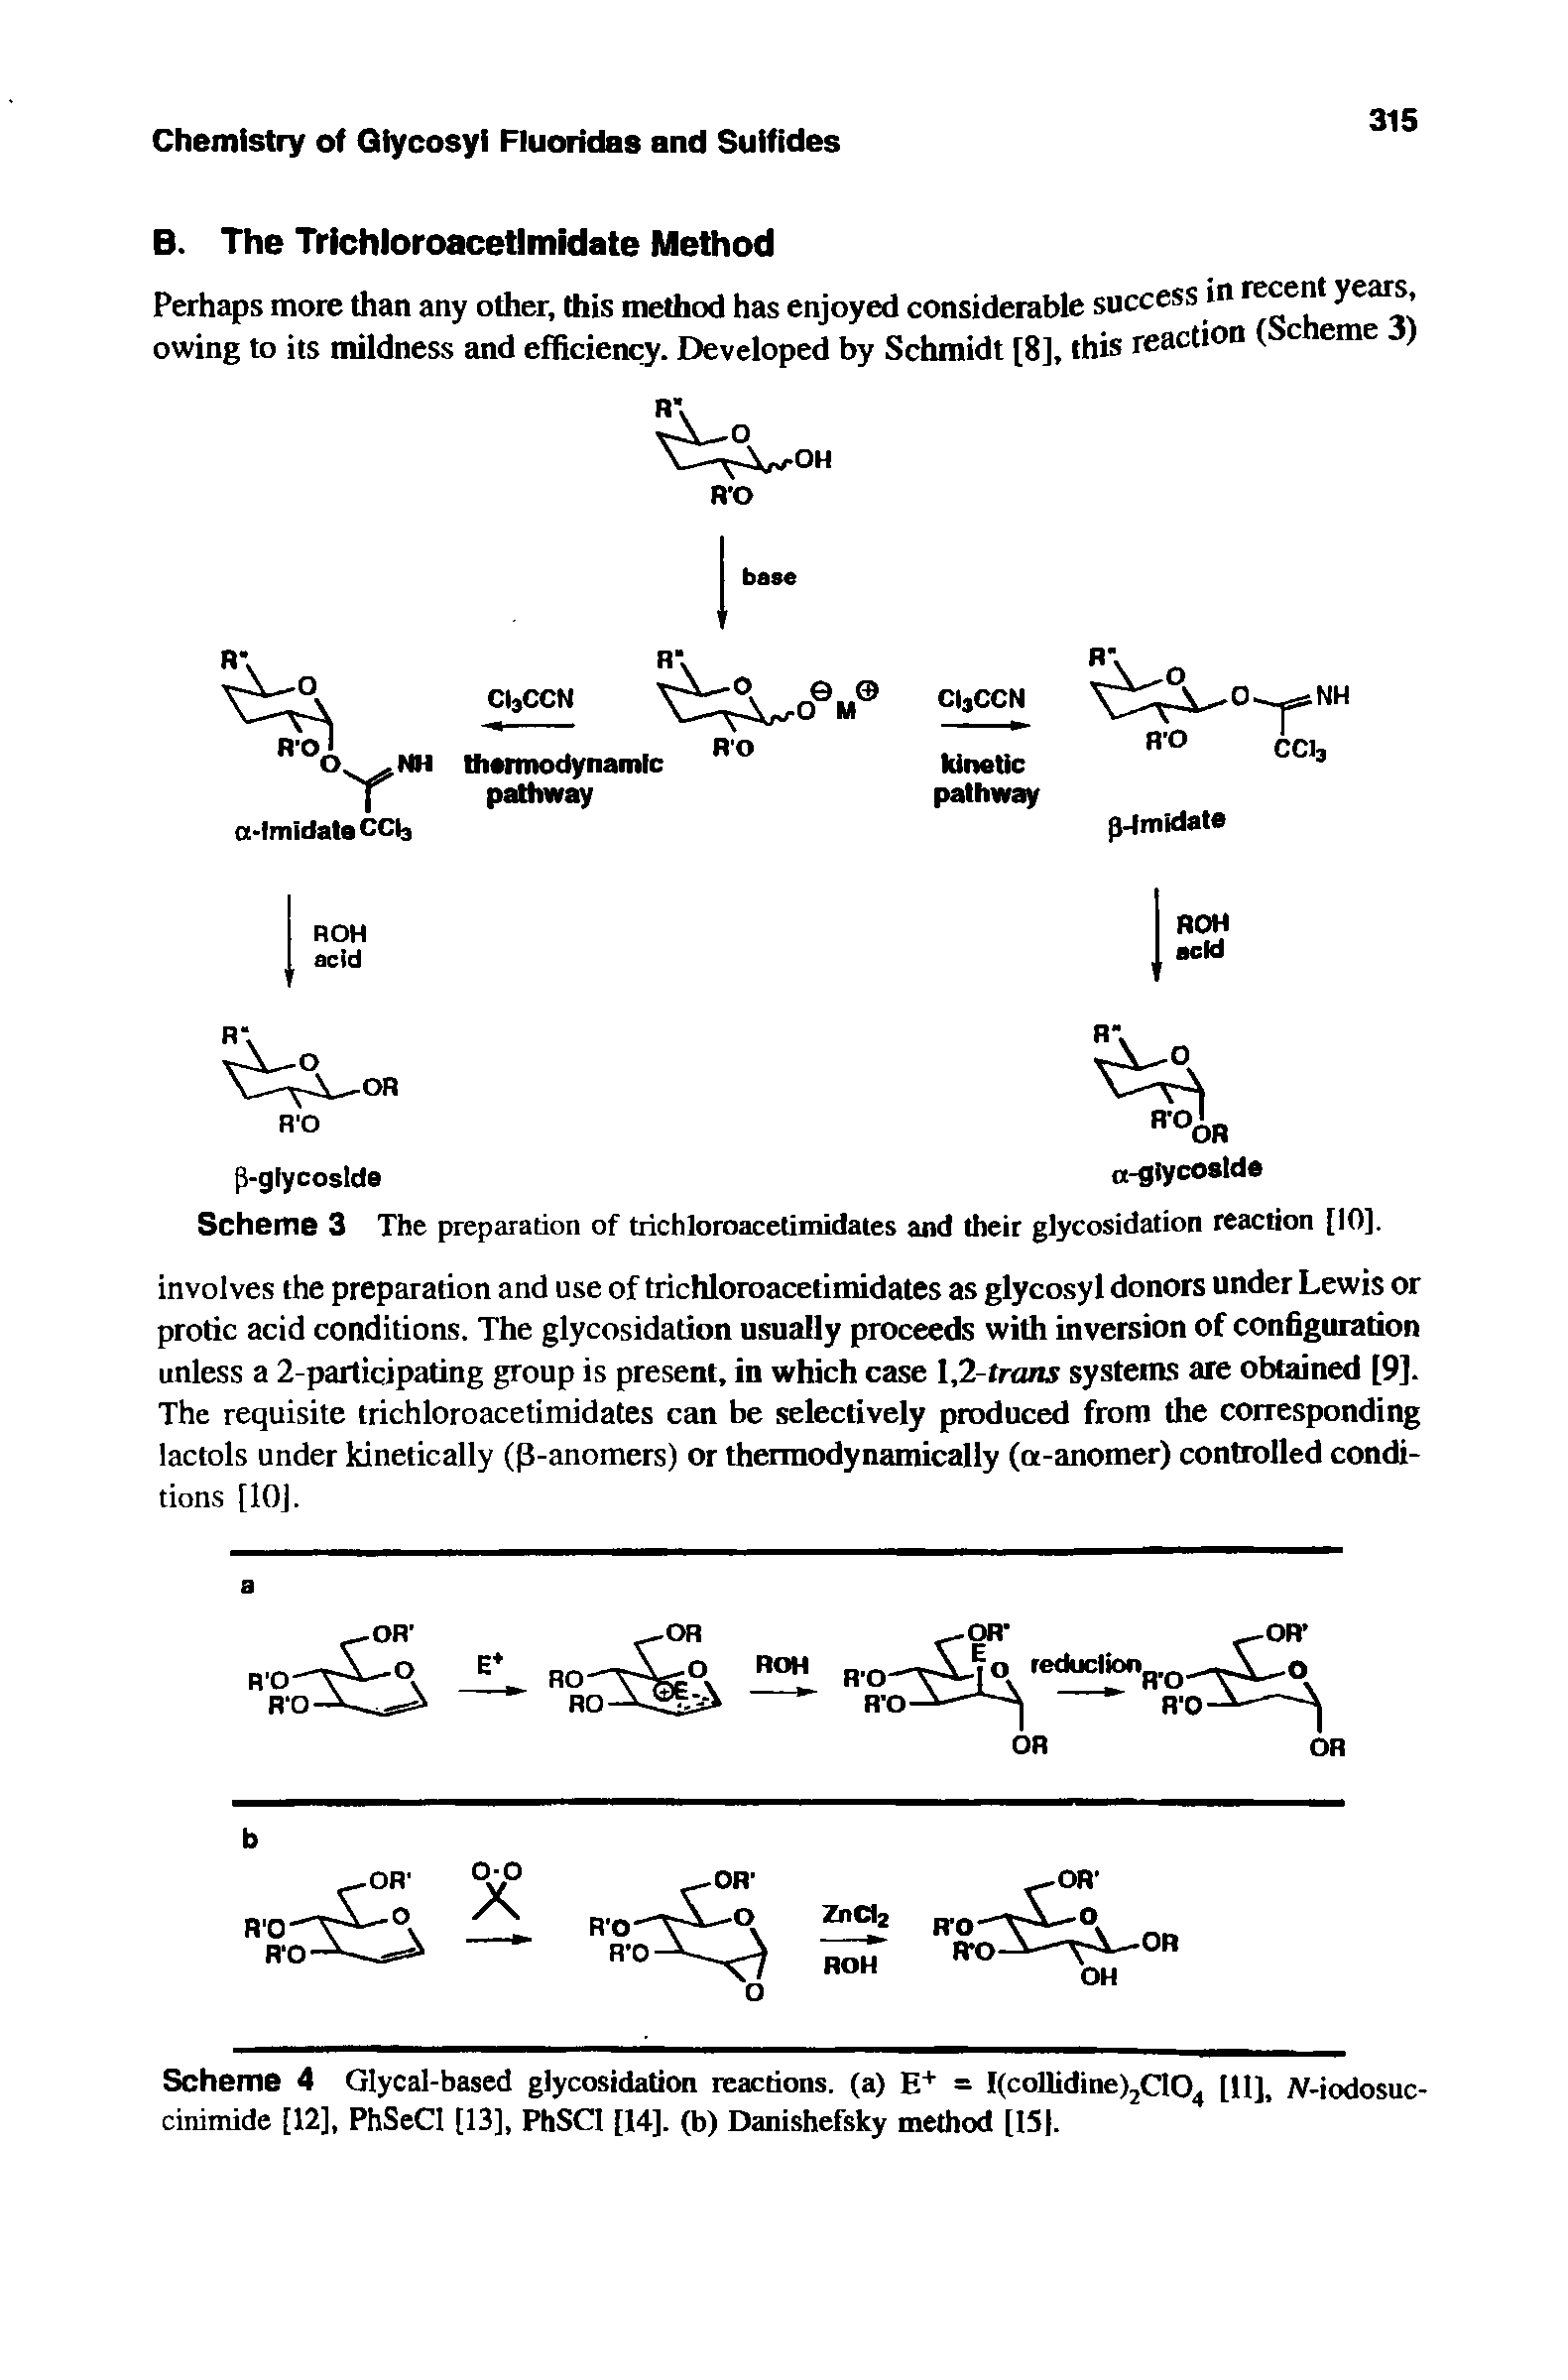 Scheme 3 The preparation of trichloroacetimidates and their glycosidation reaction [10].